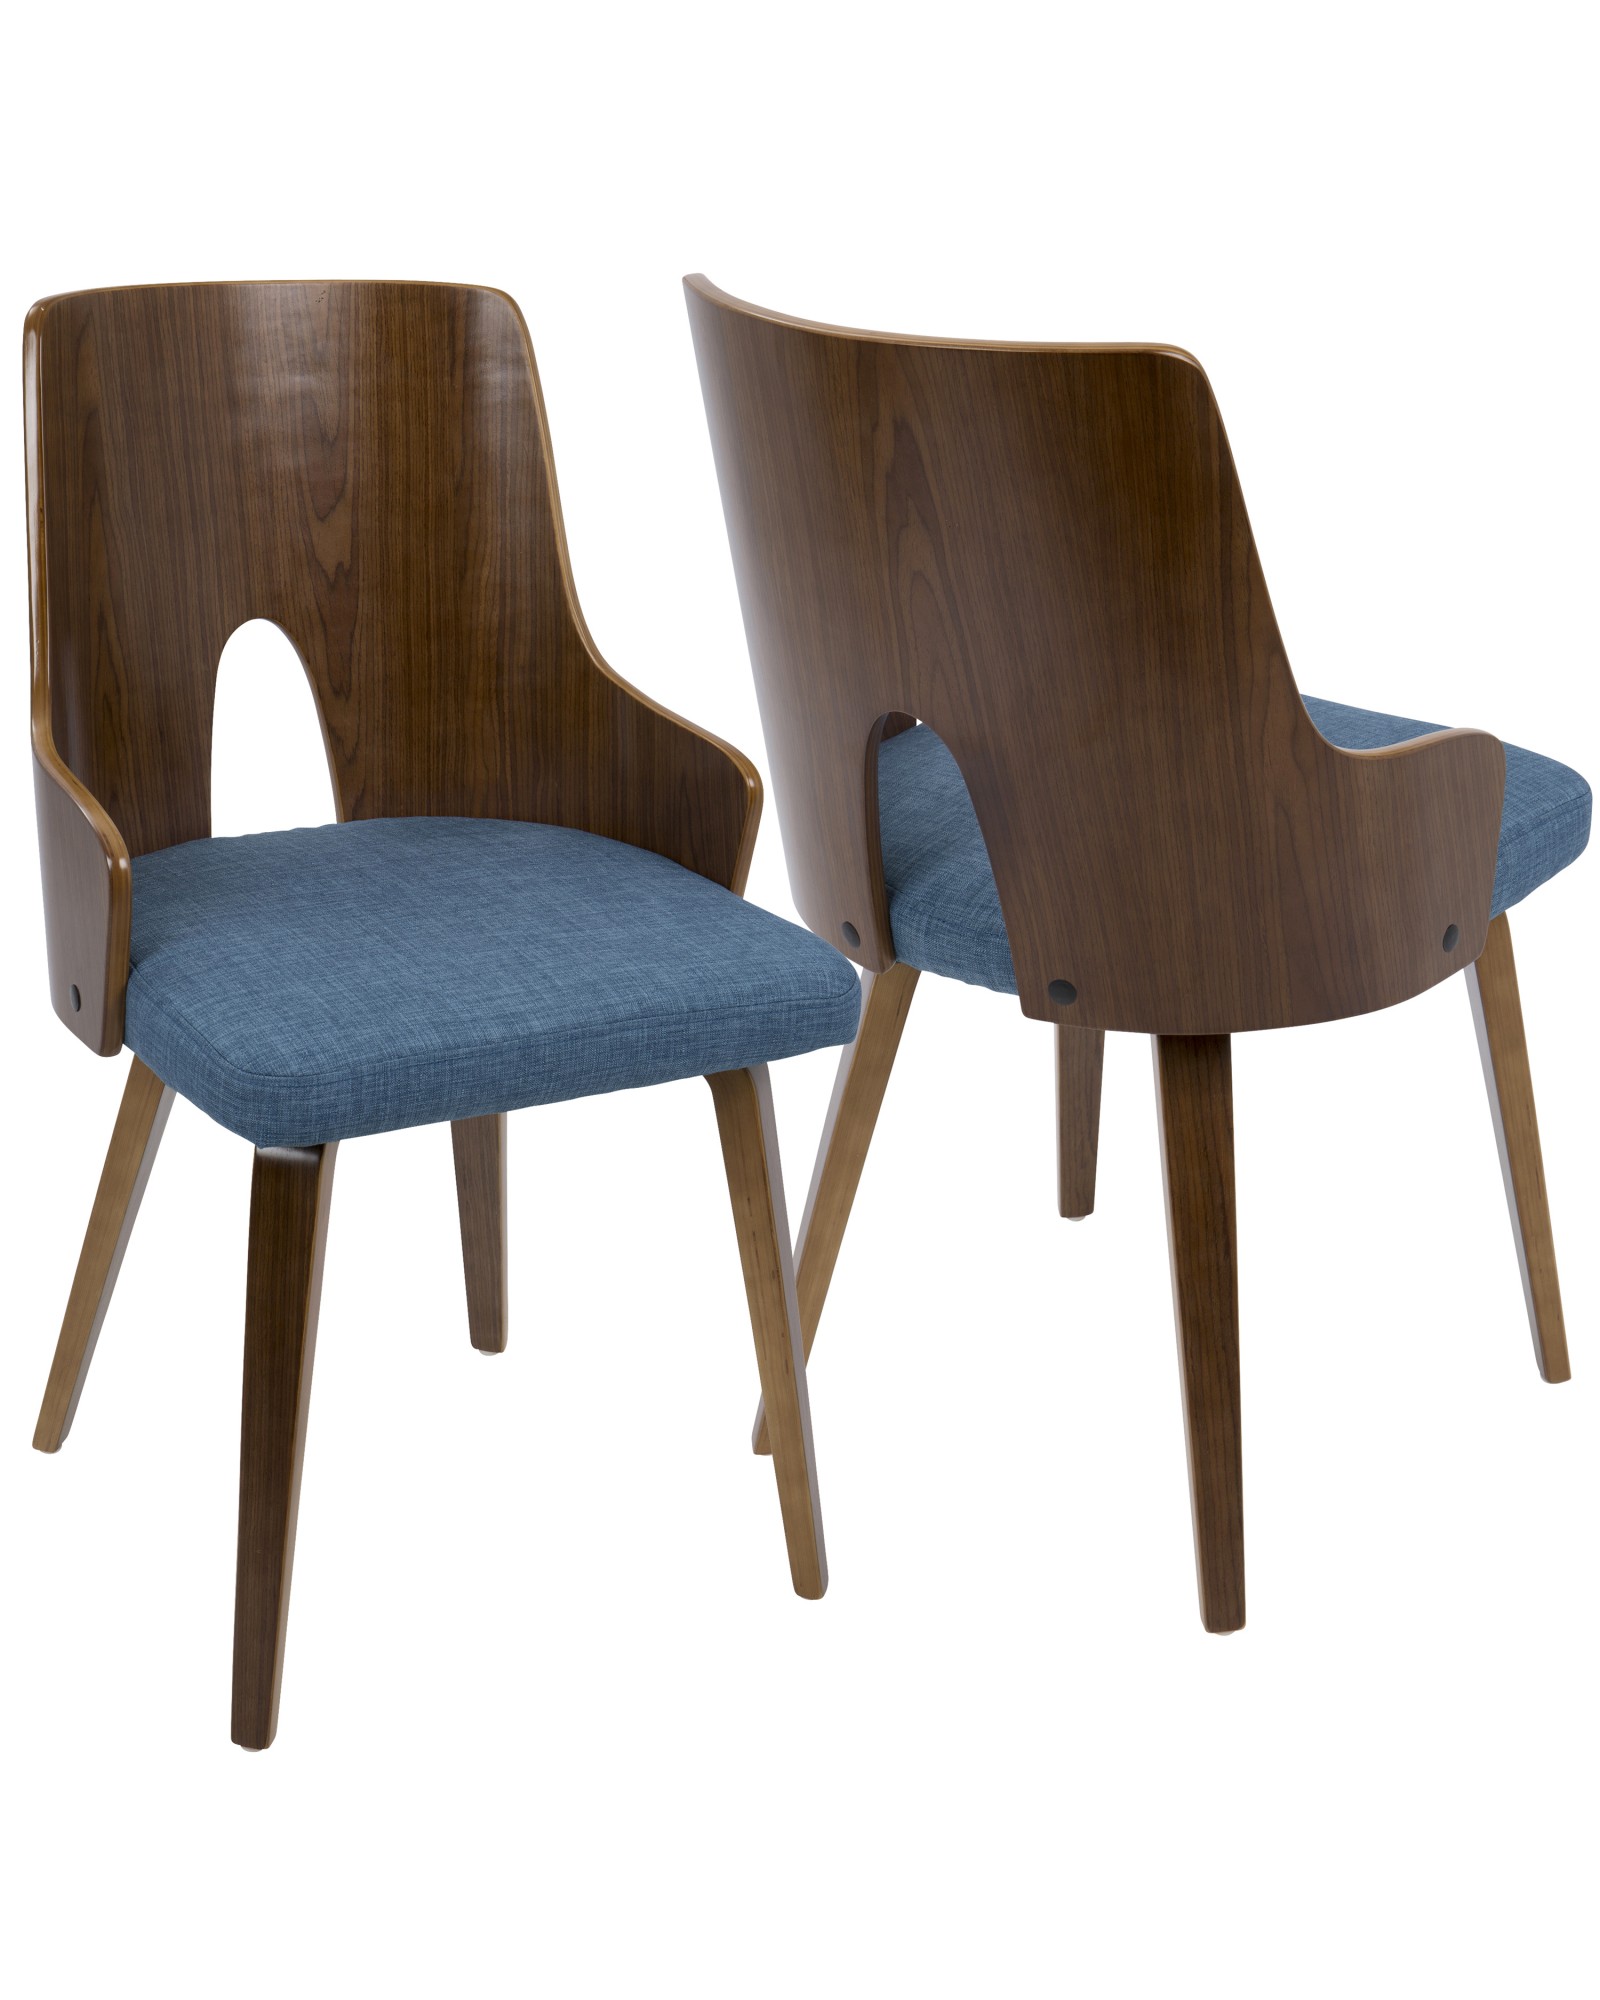 Ariana Mid-Century Modern Dining/Accent Chair in Walnut and Blue Fabric - Set of 2